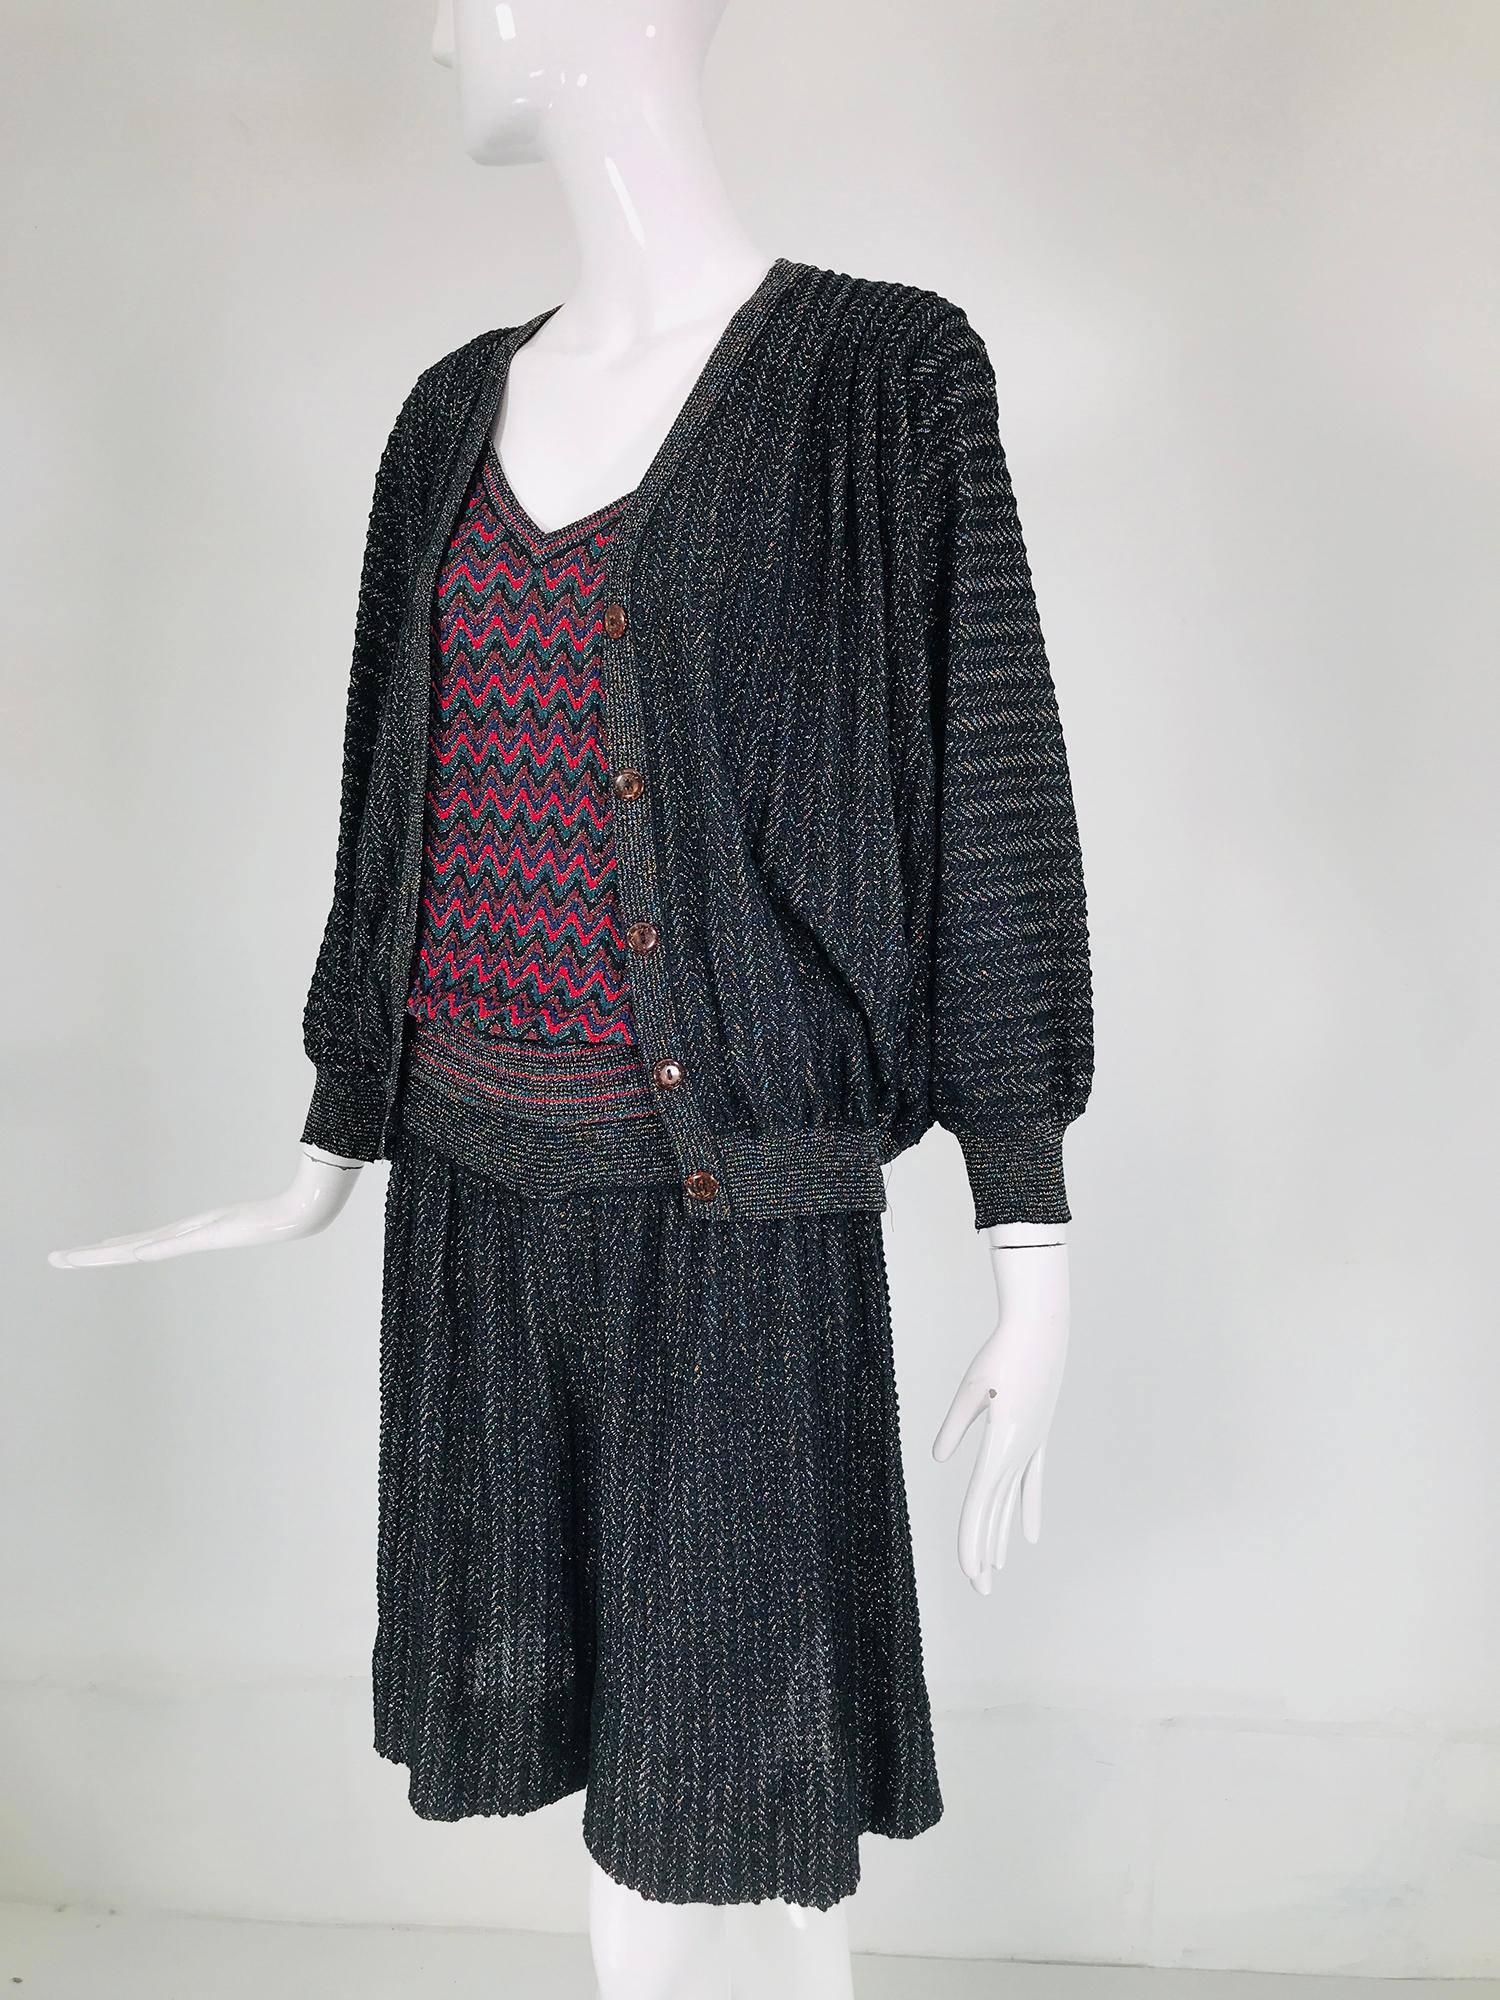 Vintage Missoni metallic knit 3pc culotte skirt set from the 1980s. Charcoal grey with silver metallic thread cardigan sweater that has bat wing sleeves, gathered shoulders & ribbed cuffs & hem. The sweater closes at the front with amber colour